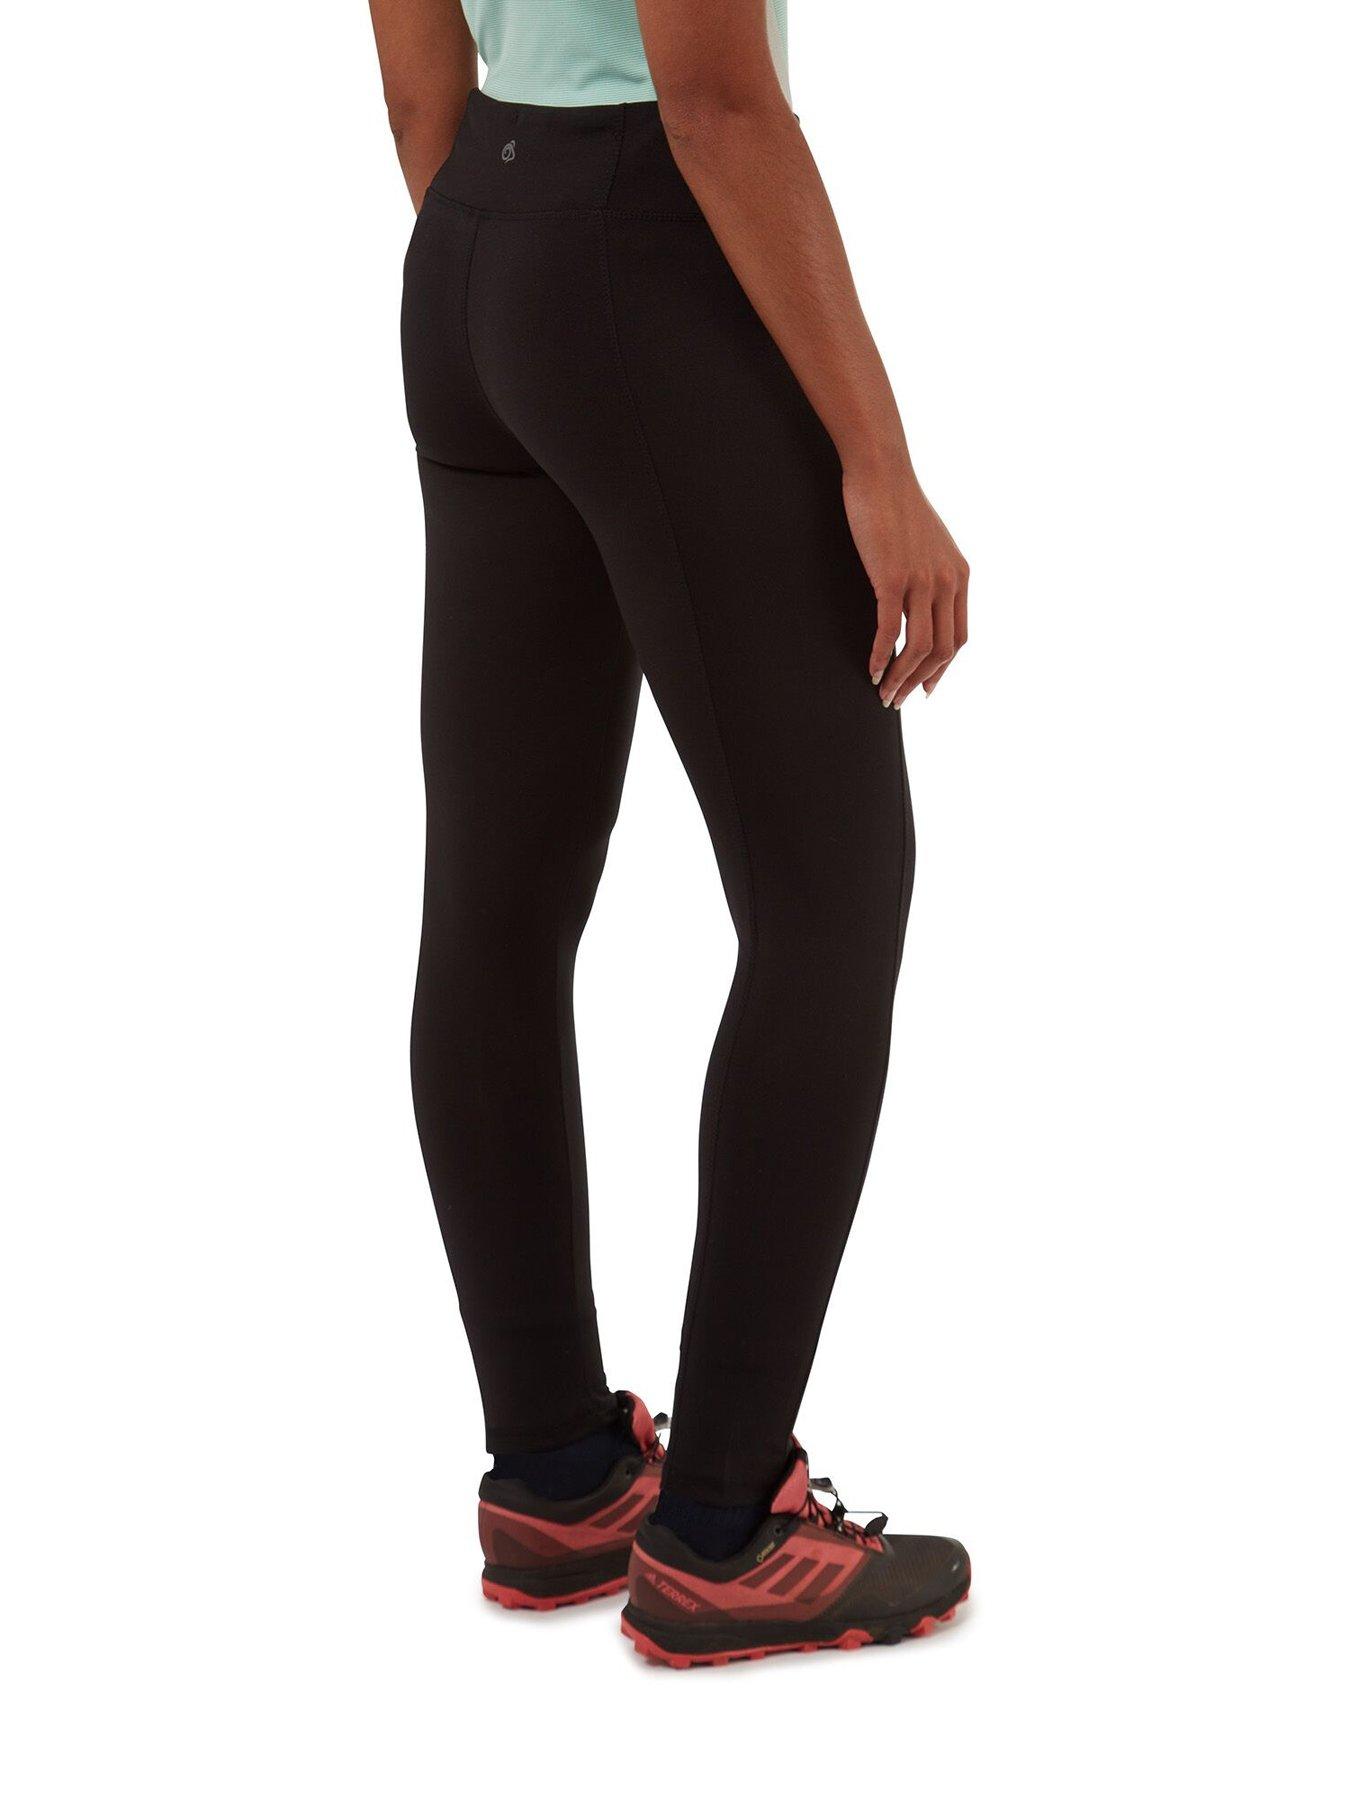 Velocity high Waist and a Trendy V Cut Band, These Leggings Offer